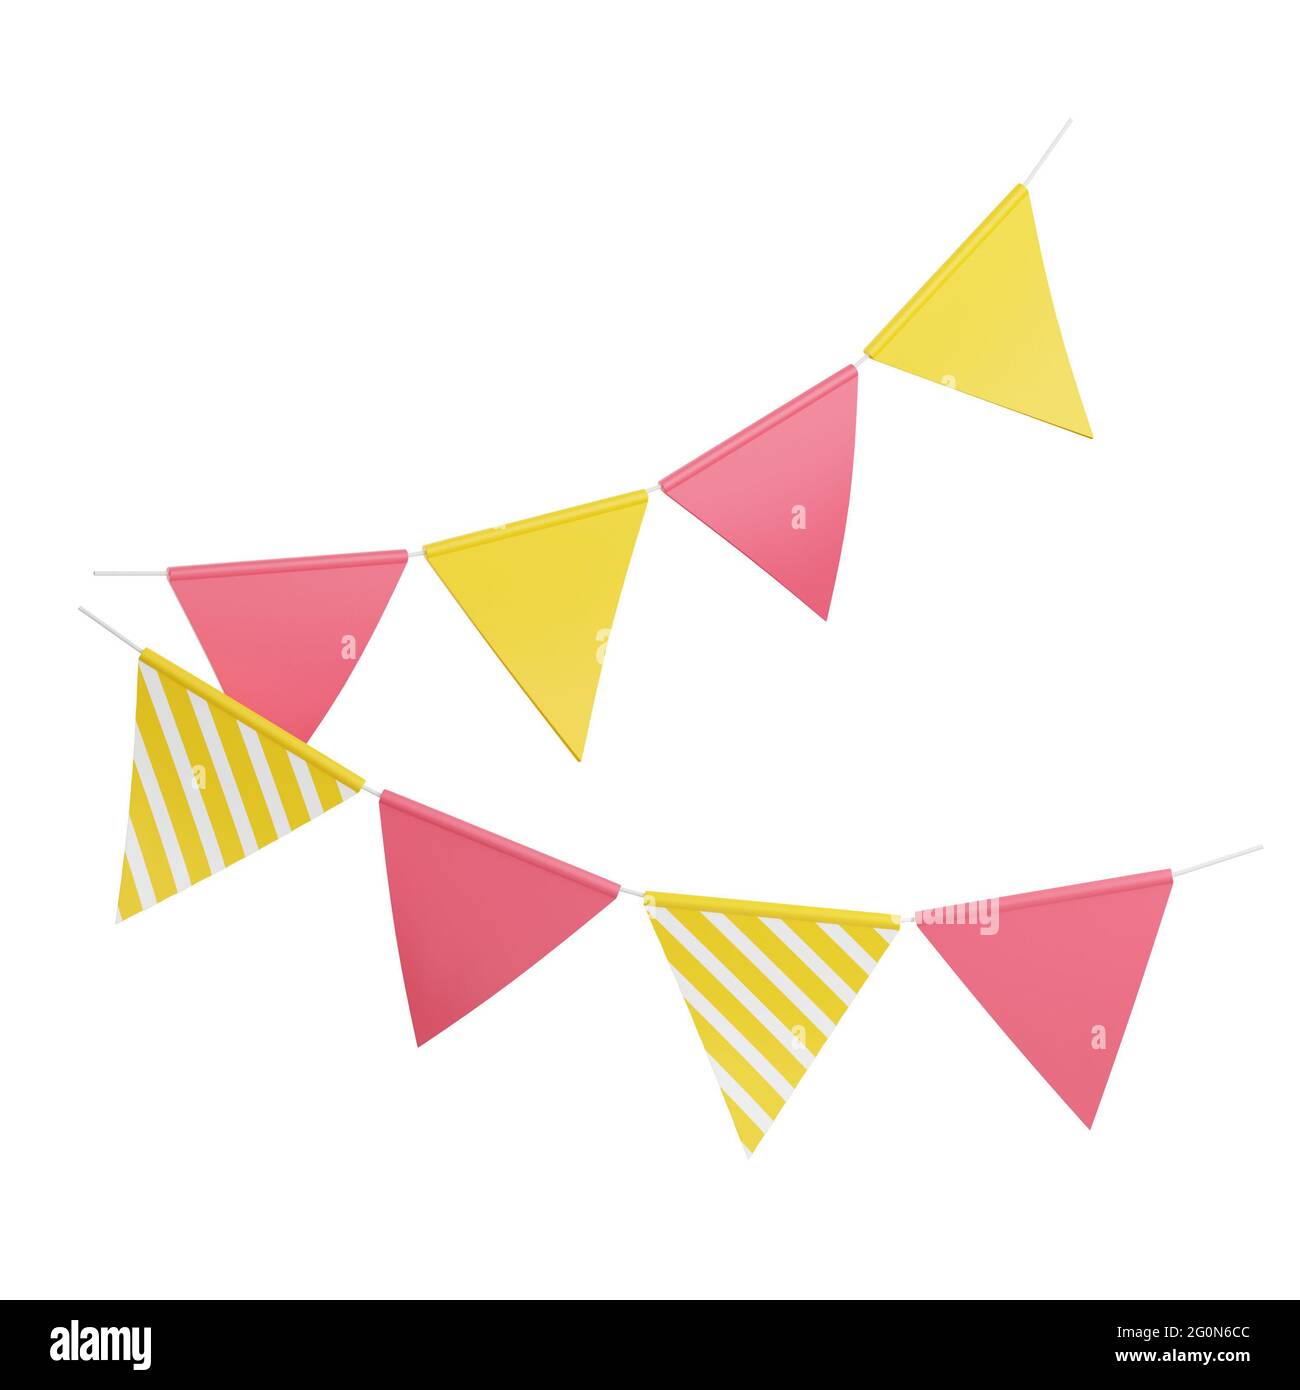 Party flags 3d render illustration. Pink and yellow triangular flags  hanging on rope for birthday or holiday decoration Stock Photo - Alamy